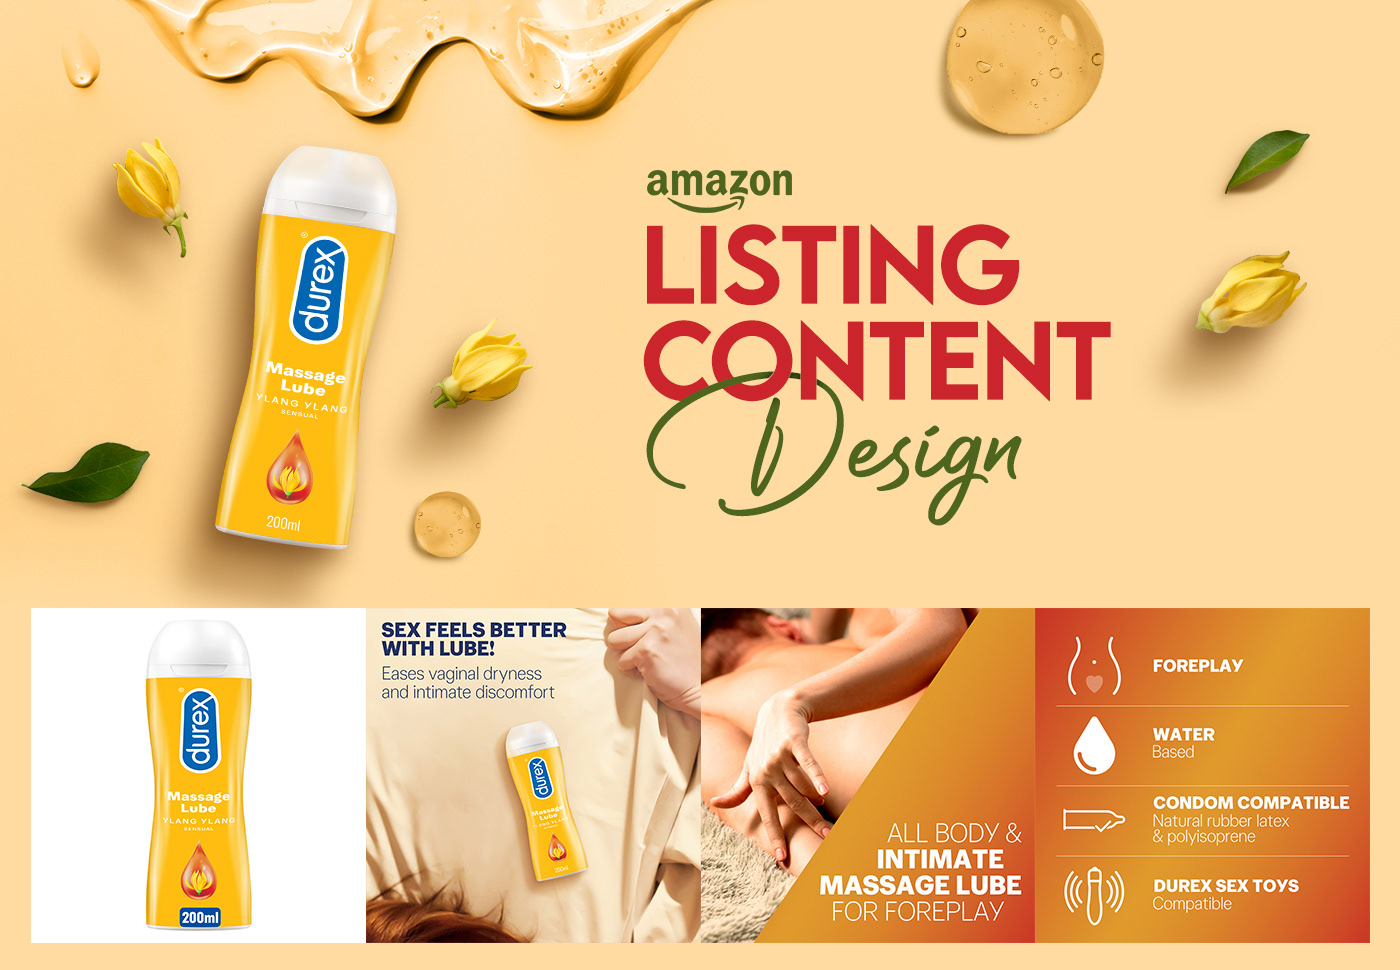 Listing Images A+ Content Amazon Listing EBC Online banner natural